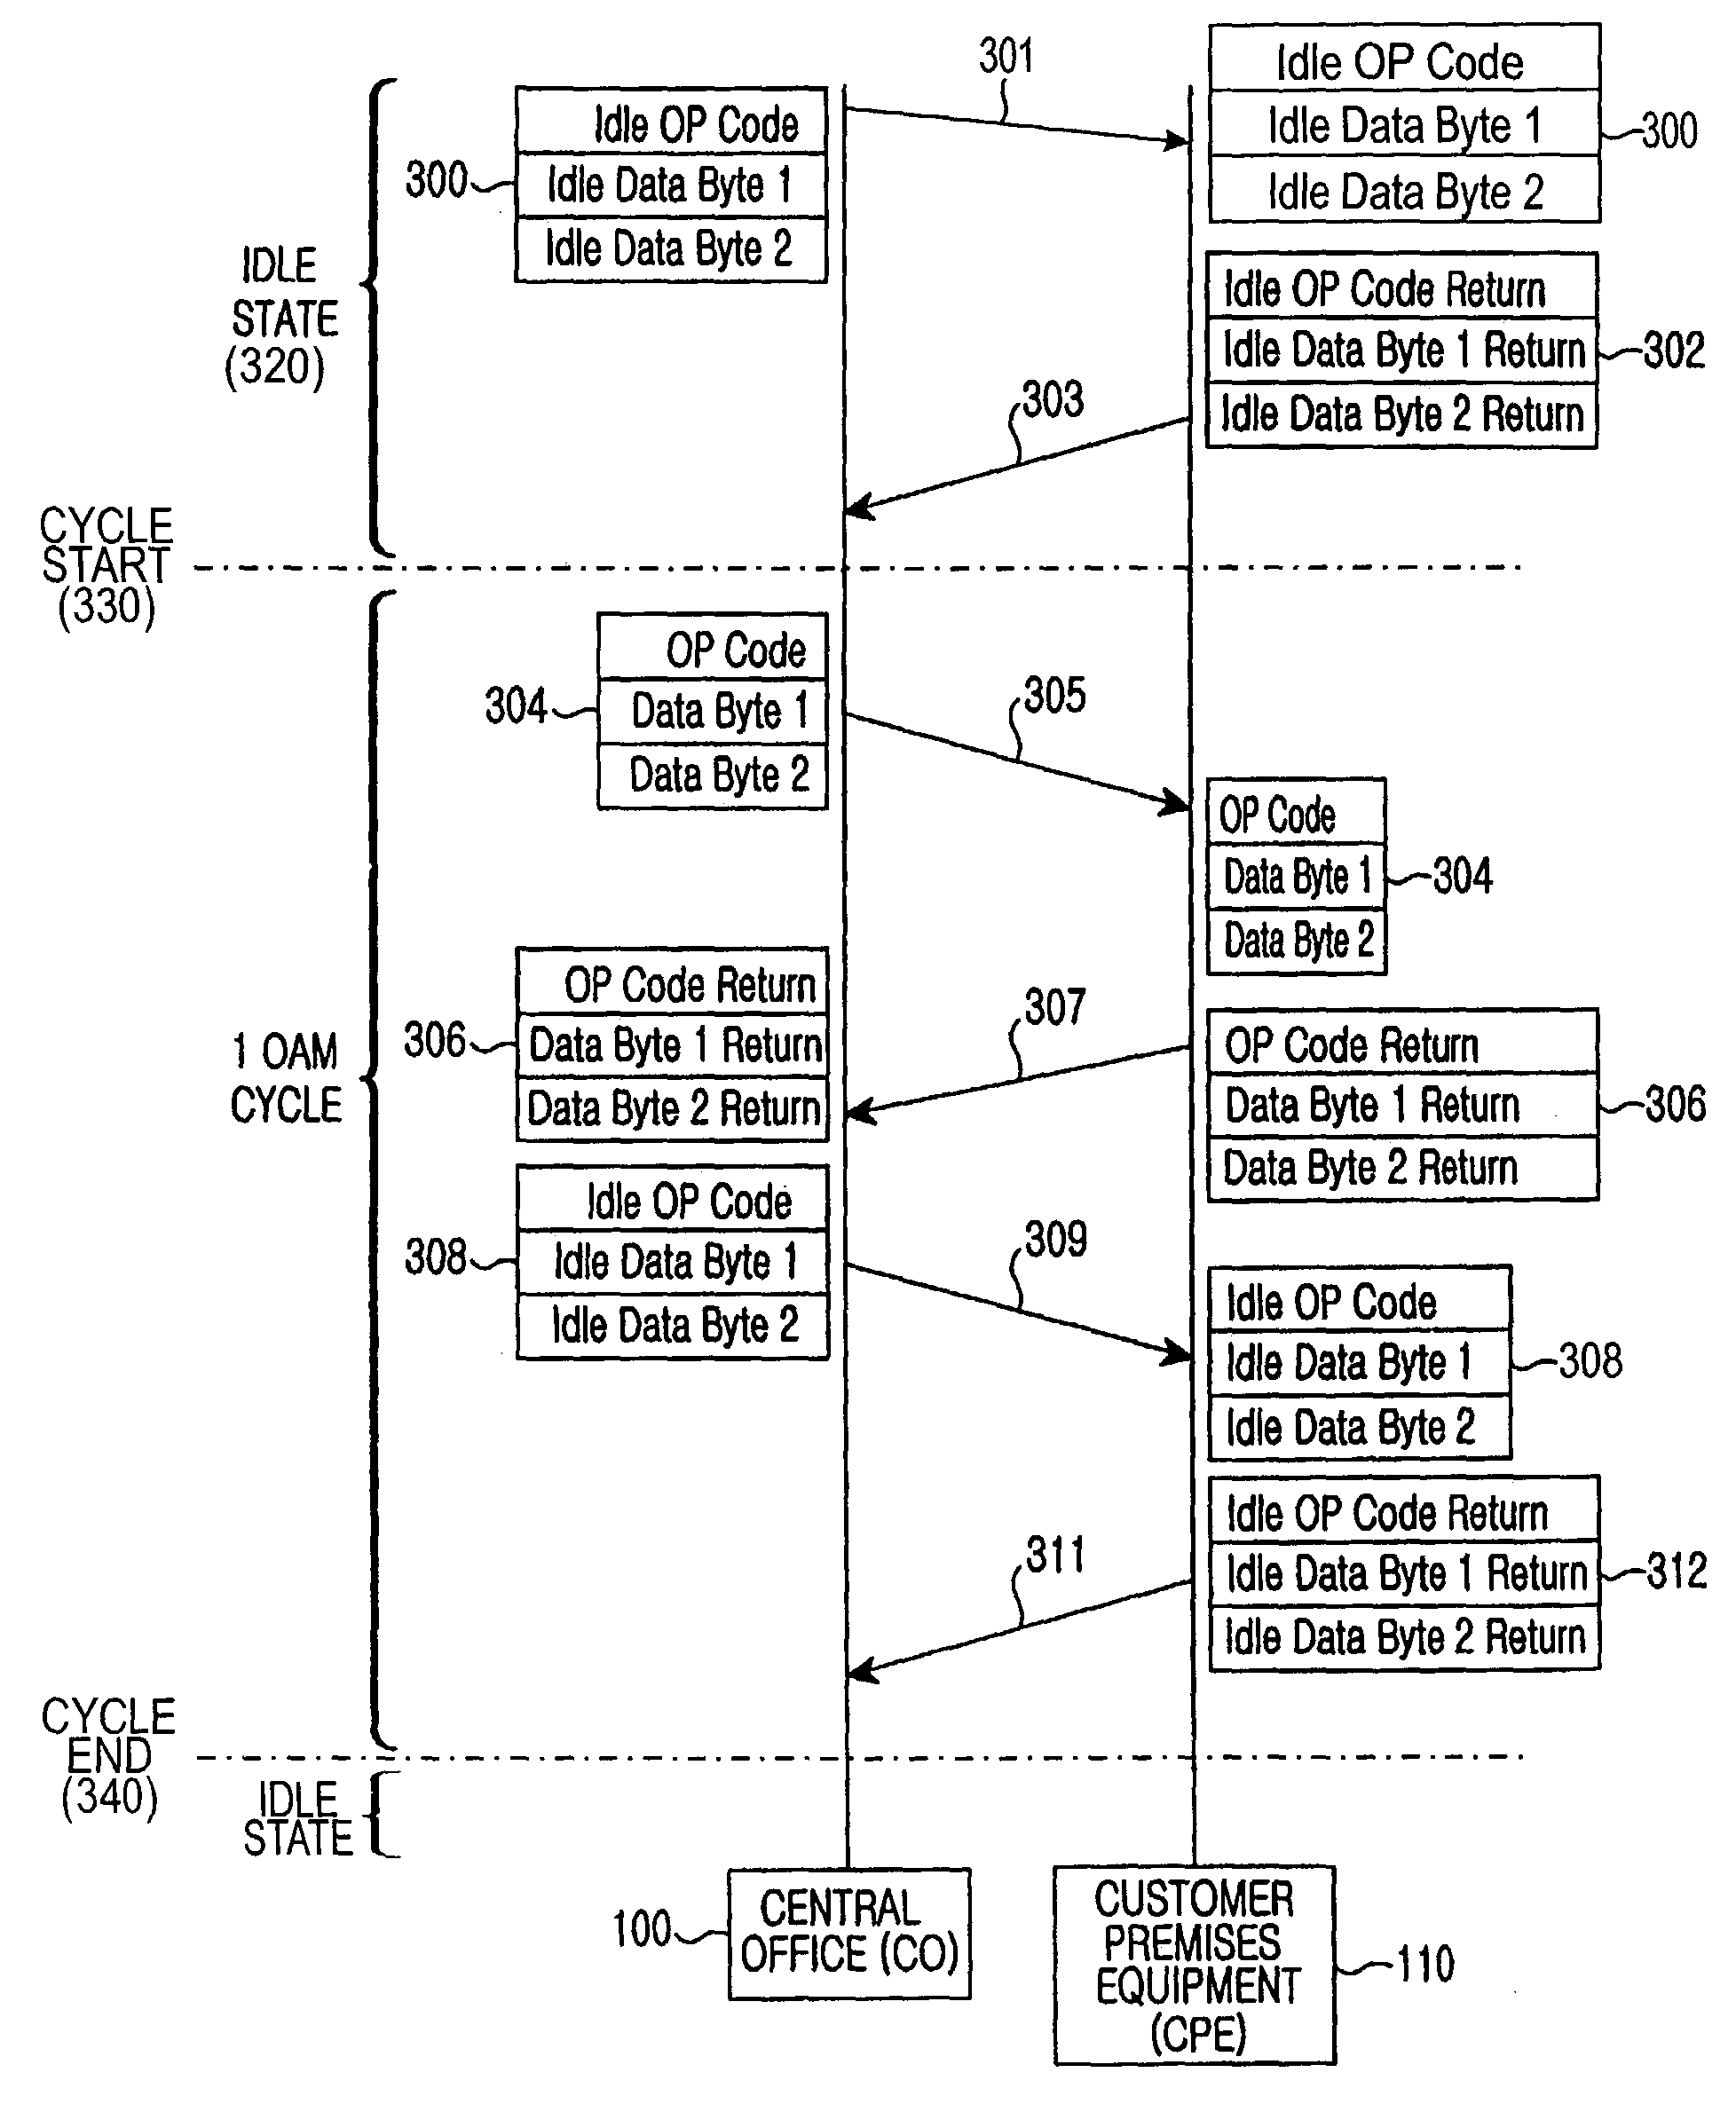 Method of operating, administrating and maintaining very high bit rate digital subscriber line